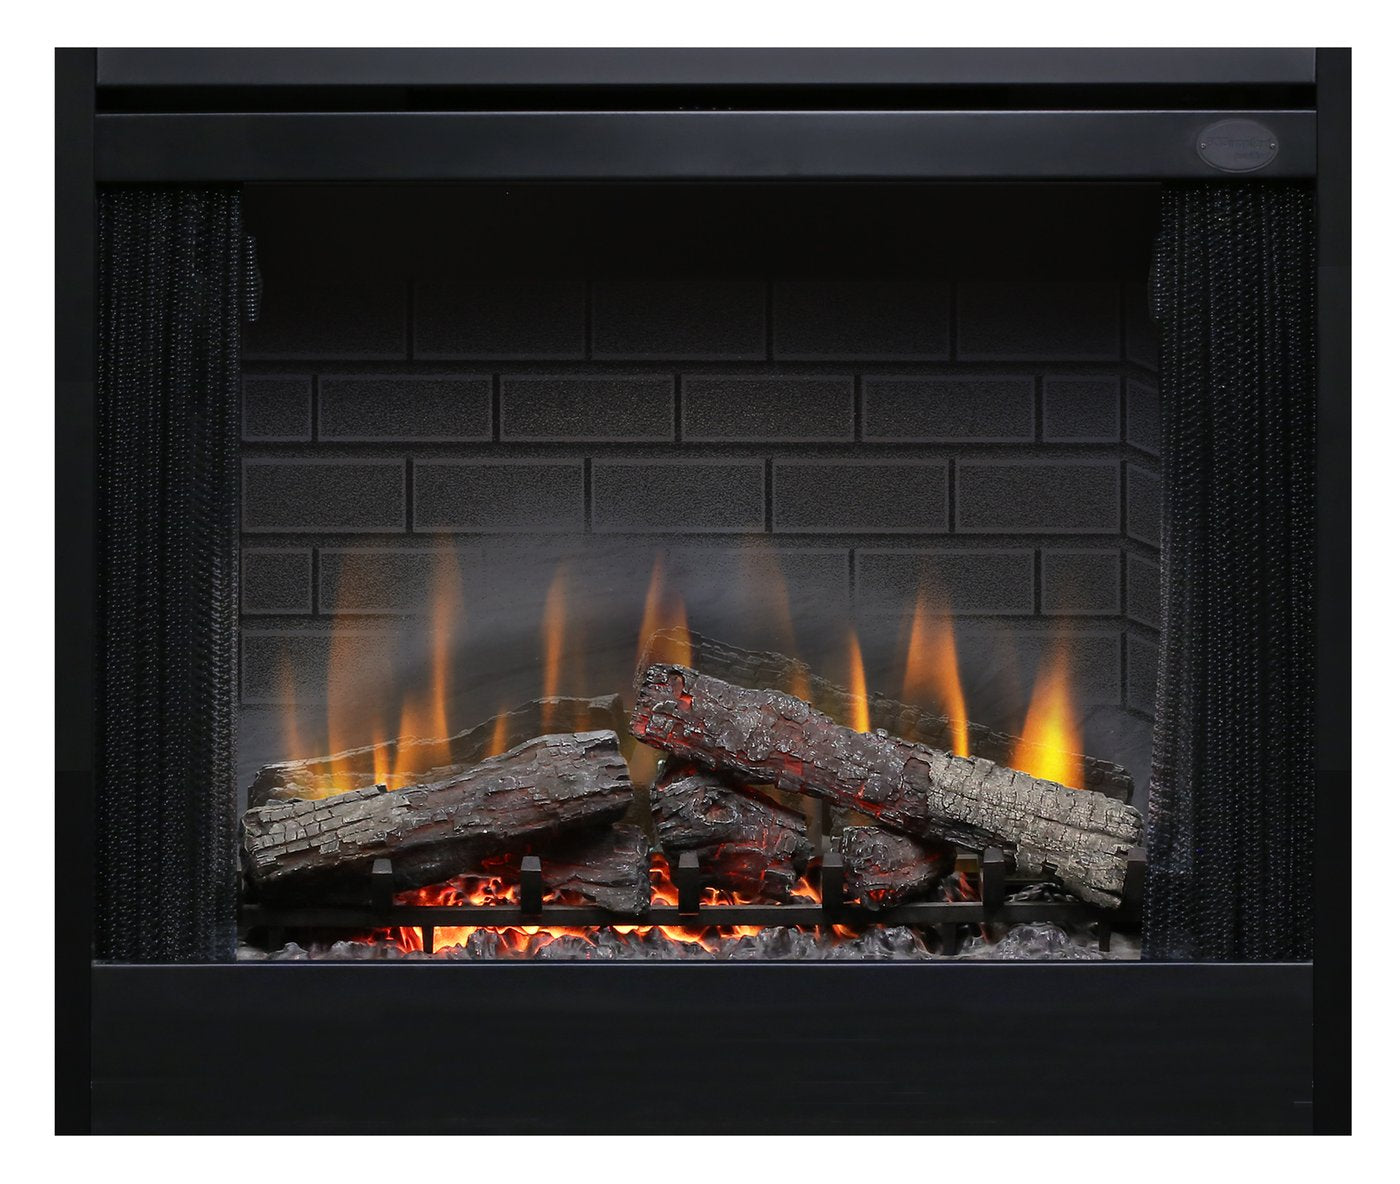 Dimplex Deluxe Built-in Electric Firebox